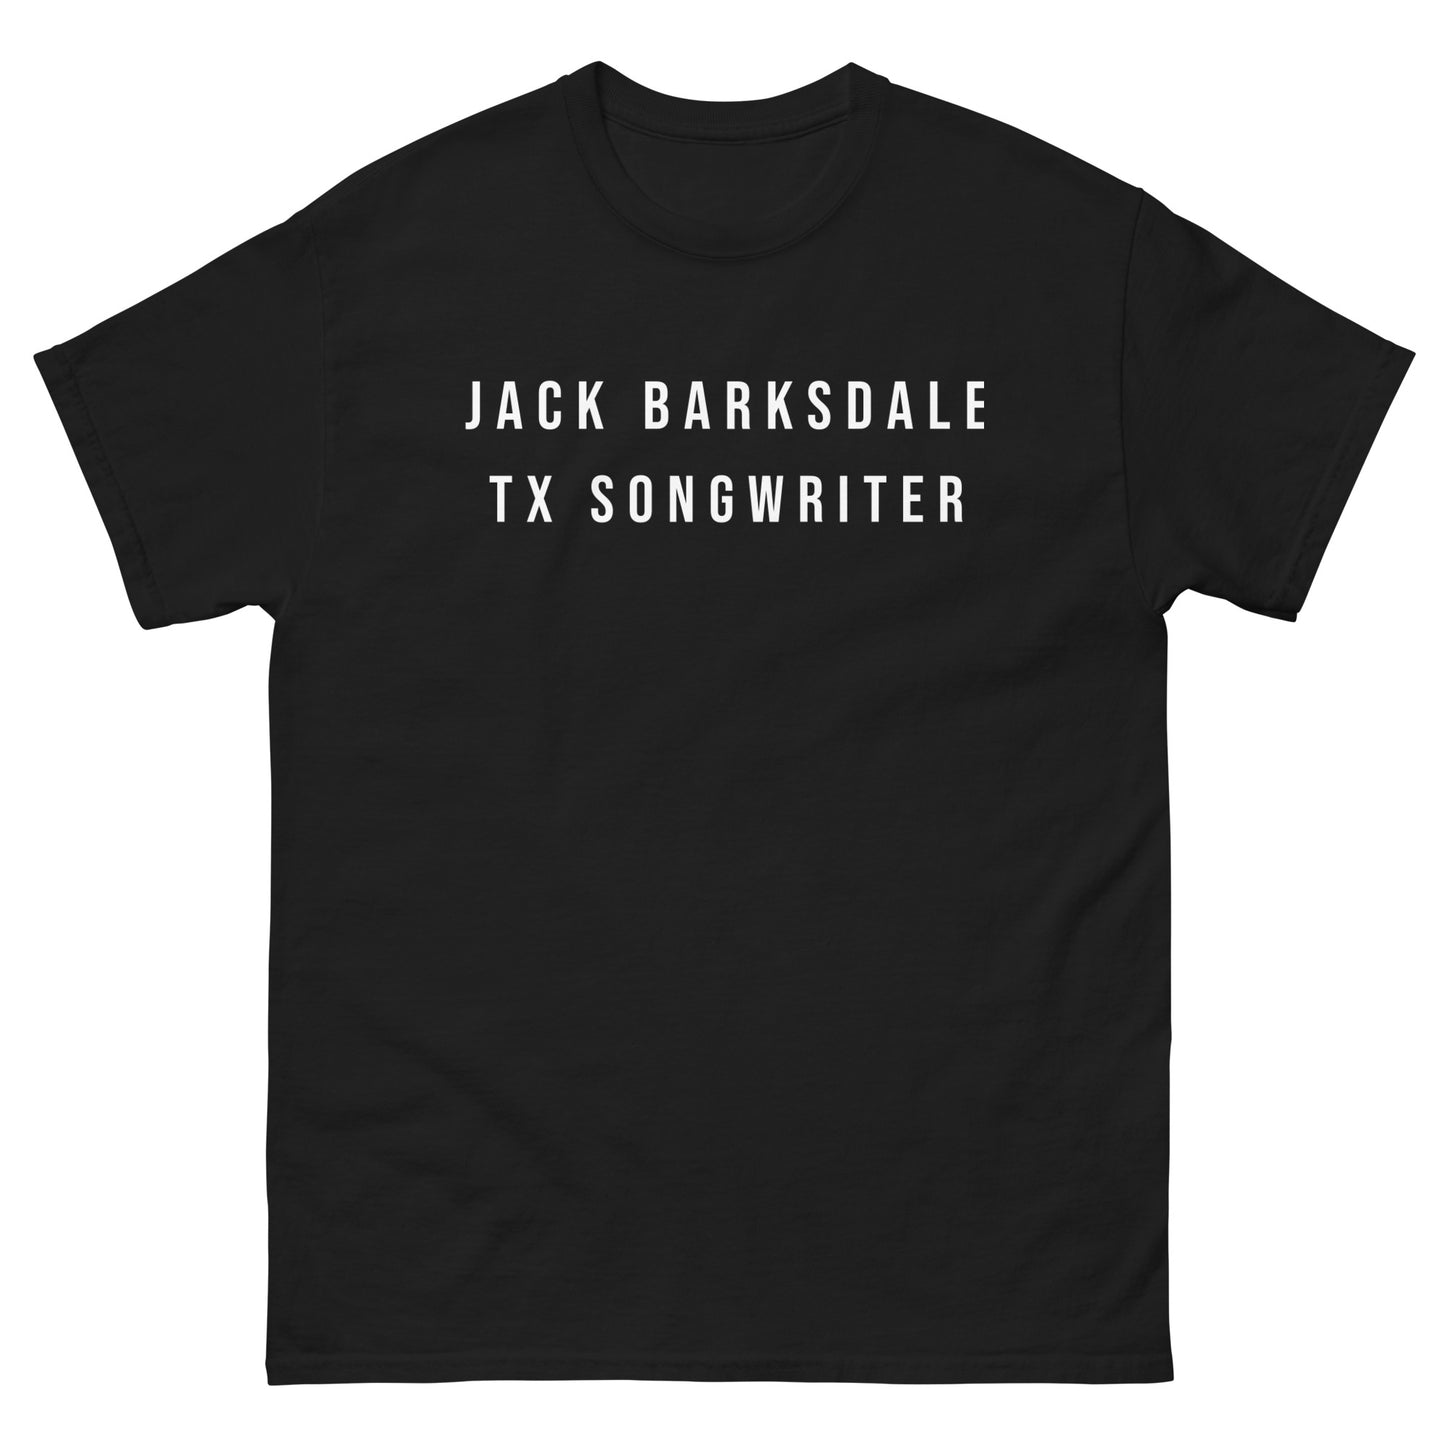 TX Songwriter classic tee